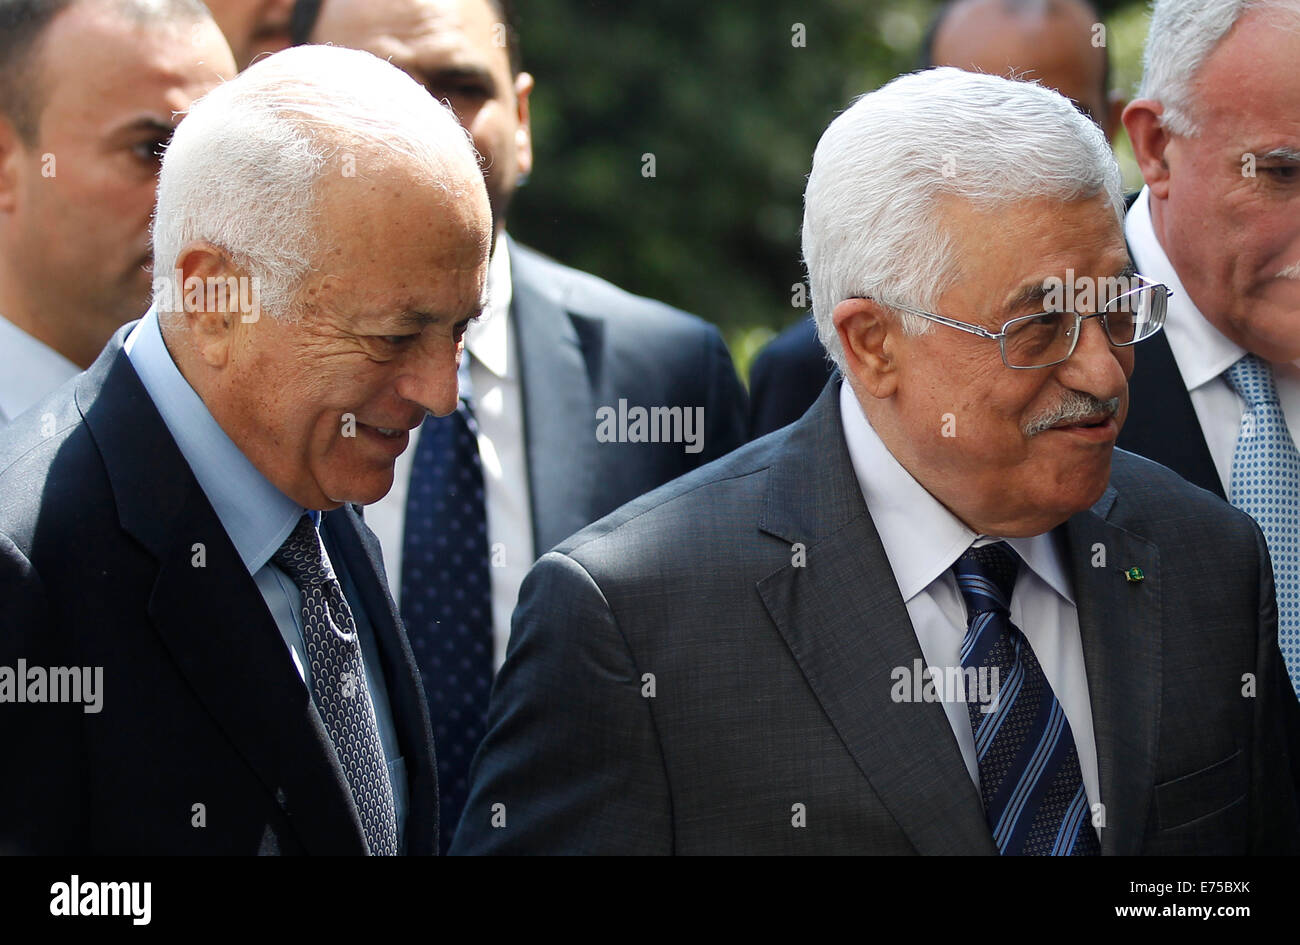 Cairo, Egypt. 7th Sep, 2014. Arab League Secretary General Nabil al-Arabi (L) and Palestinian President Mahmoud Abbas (R) walk into an an Arab League emergency meeting in Cairo, Egypt, Sept. 7, 2014. Arab foreign ministers were expected to issue a resolution to confront militants overrunning large areas of Iraq and Syria and declared a cross-border Islamic States. Credit:  Ahmed Gomaa/Xinhua/Alamy Live News Stock Photo